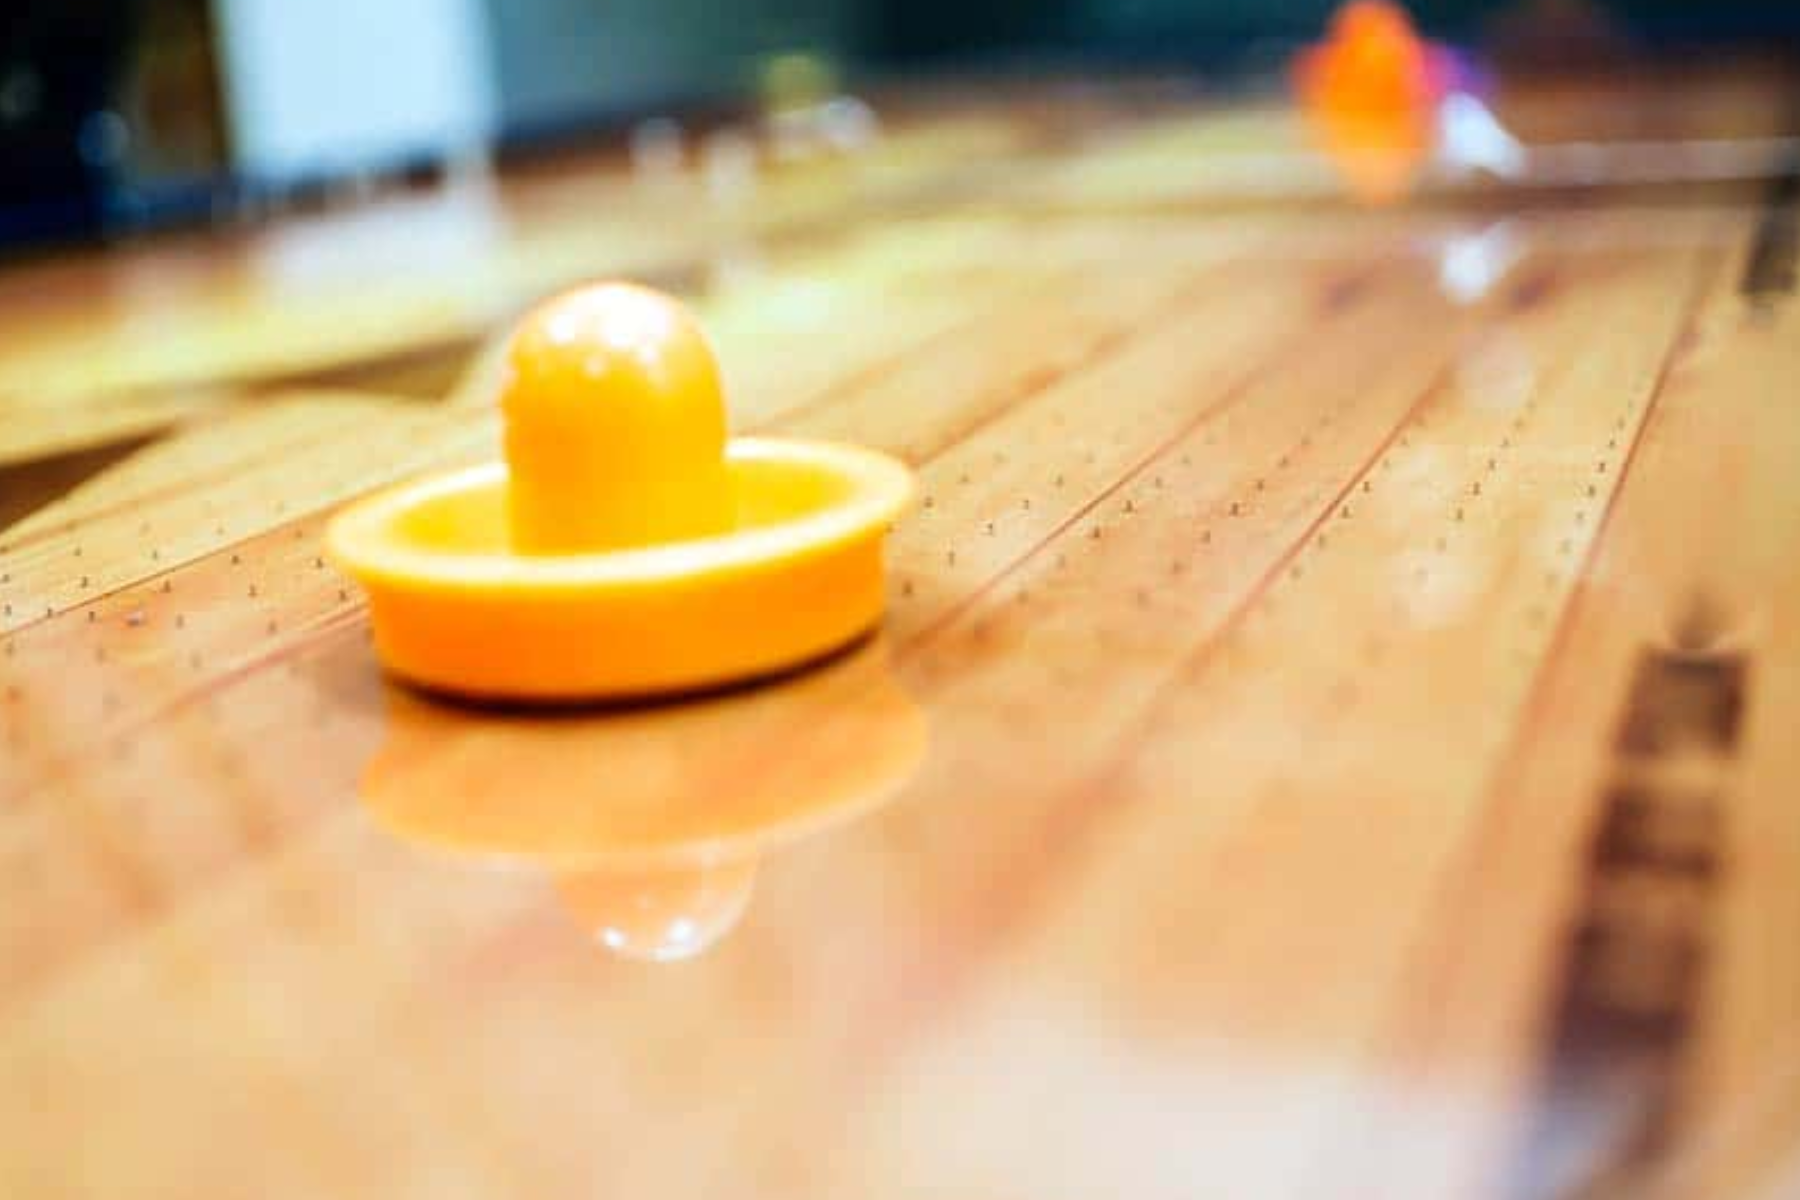 A close-up view of a yellow Air Hockey puck resting on the surface of the table